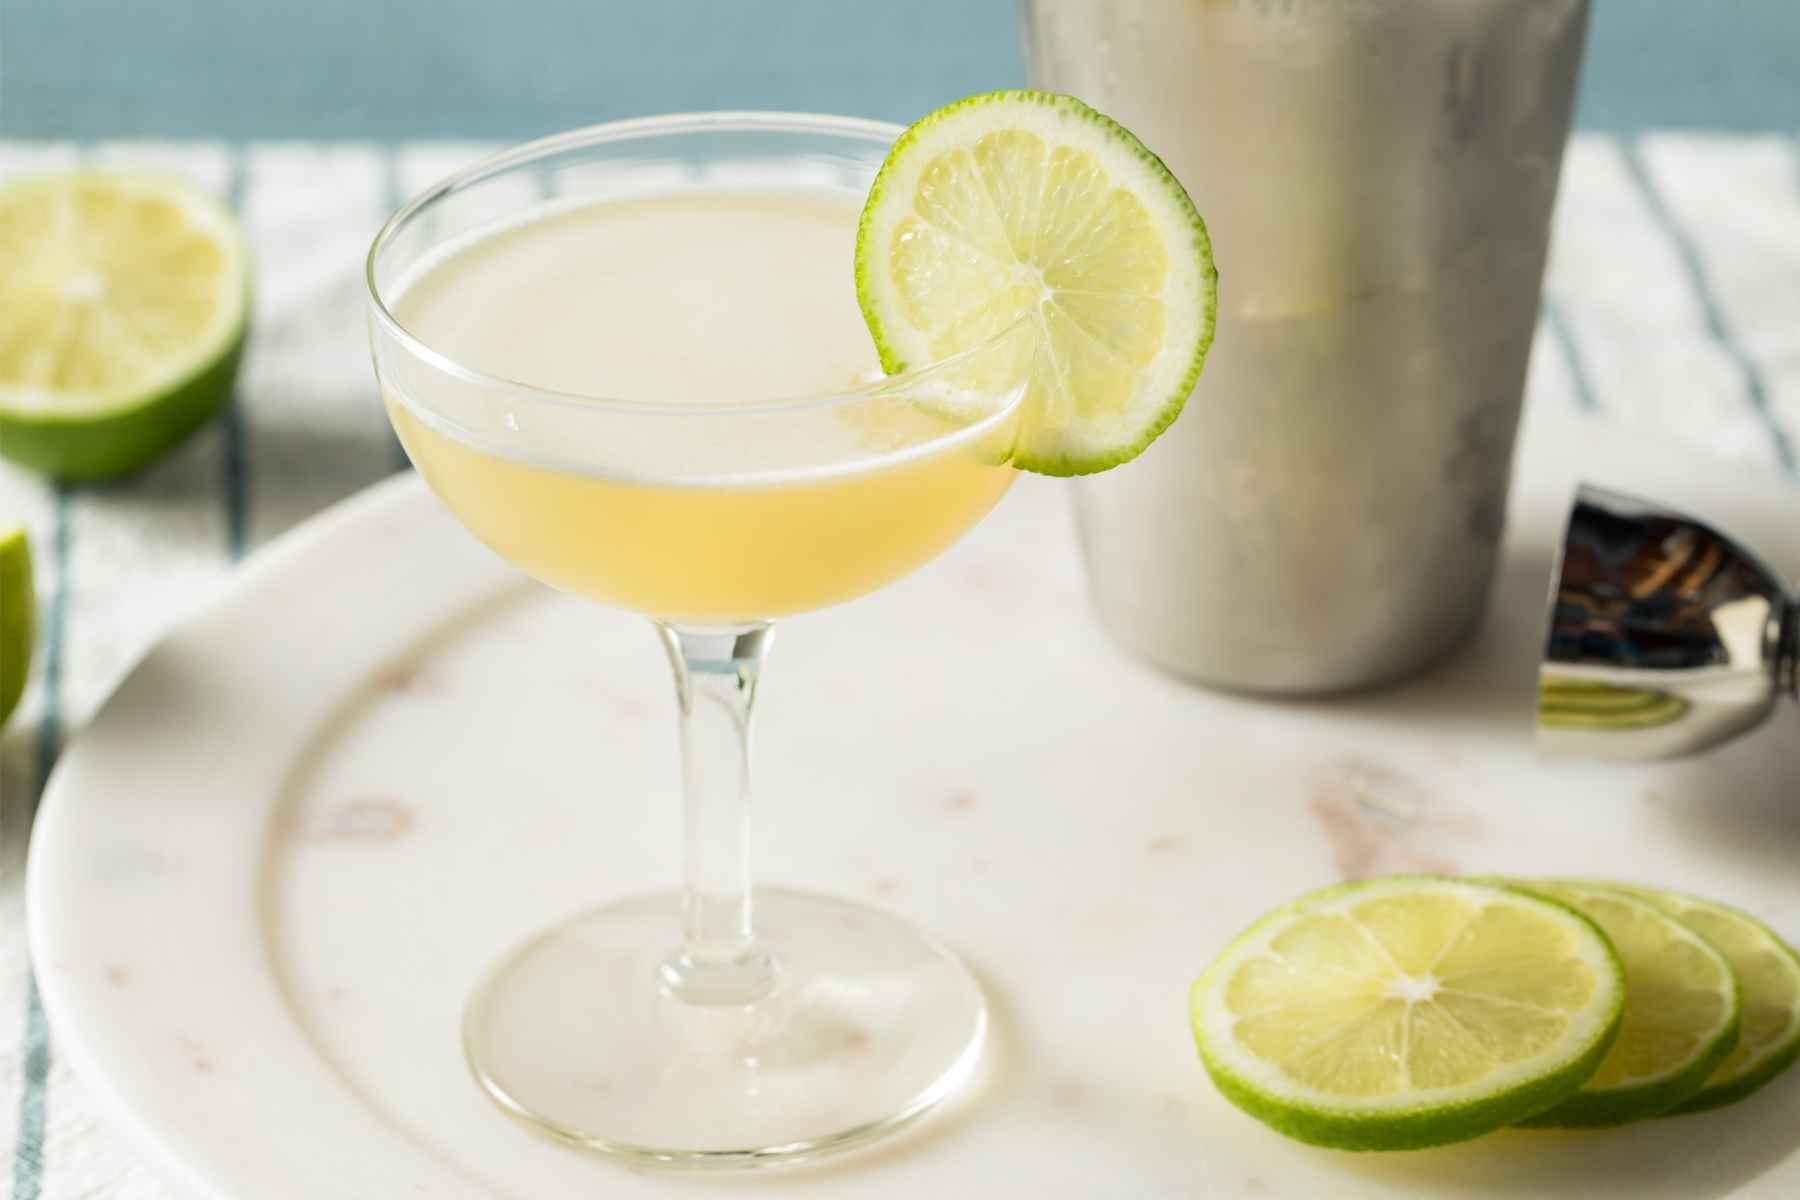 The Gimlet Goes To Grenoble! — Try Tribe’s French Gimlet Cocktail